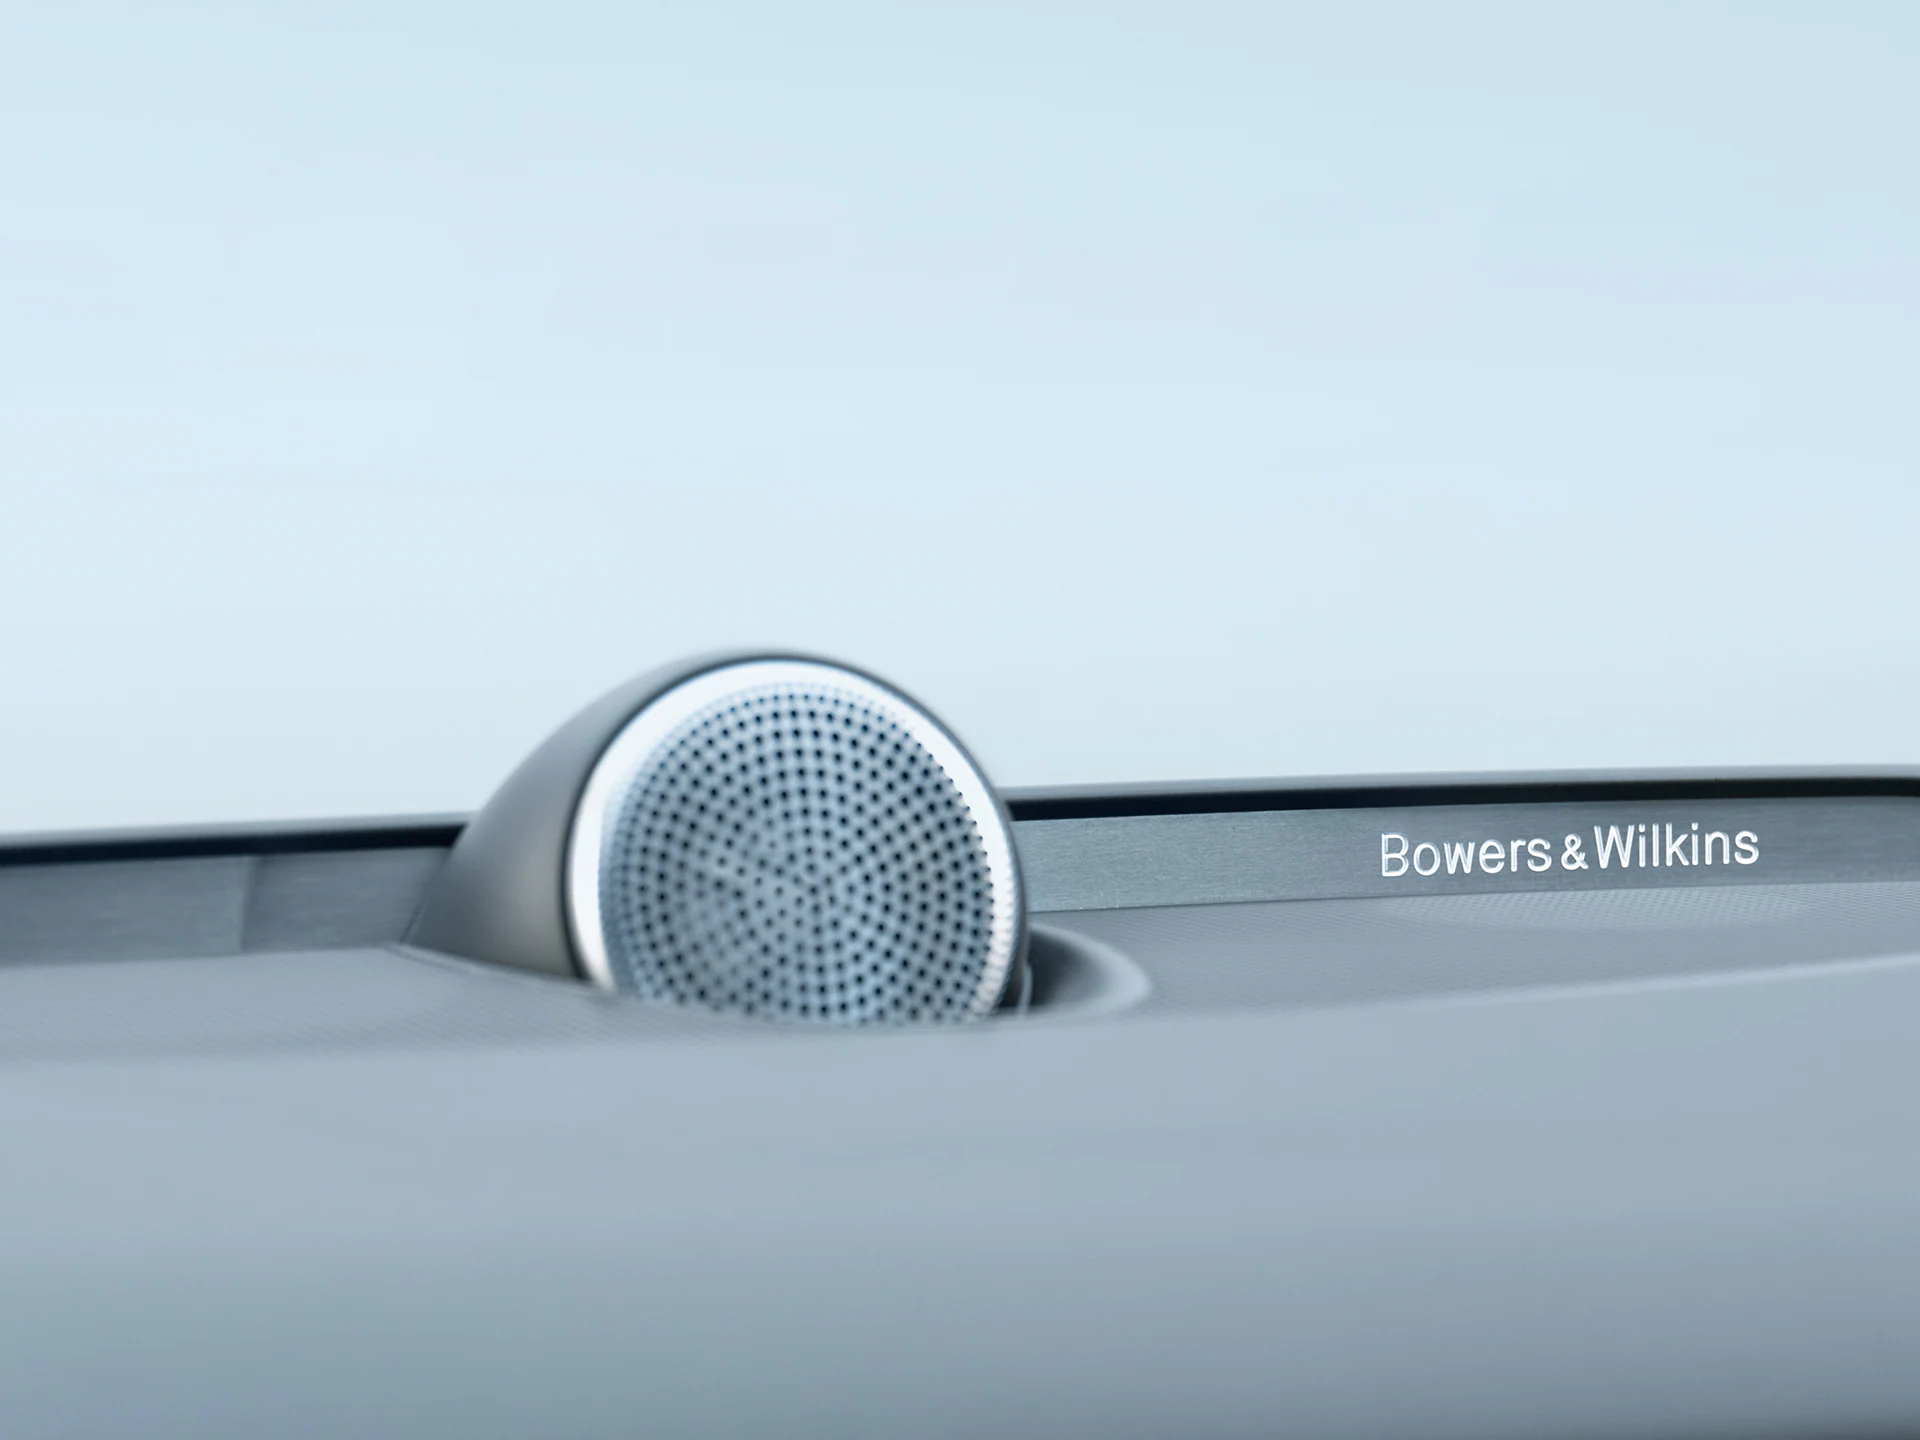 Bowers & Wilkins high-fidelity audio system Image